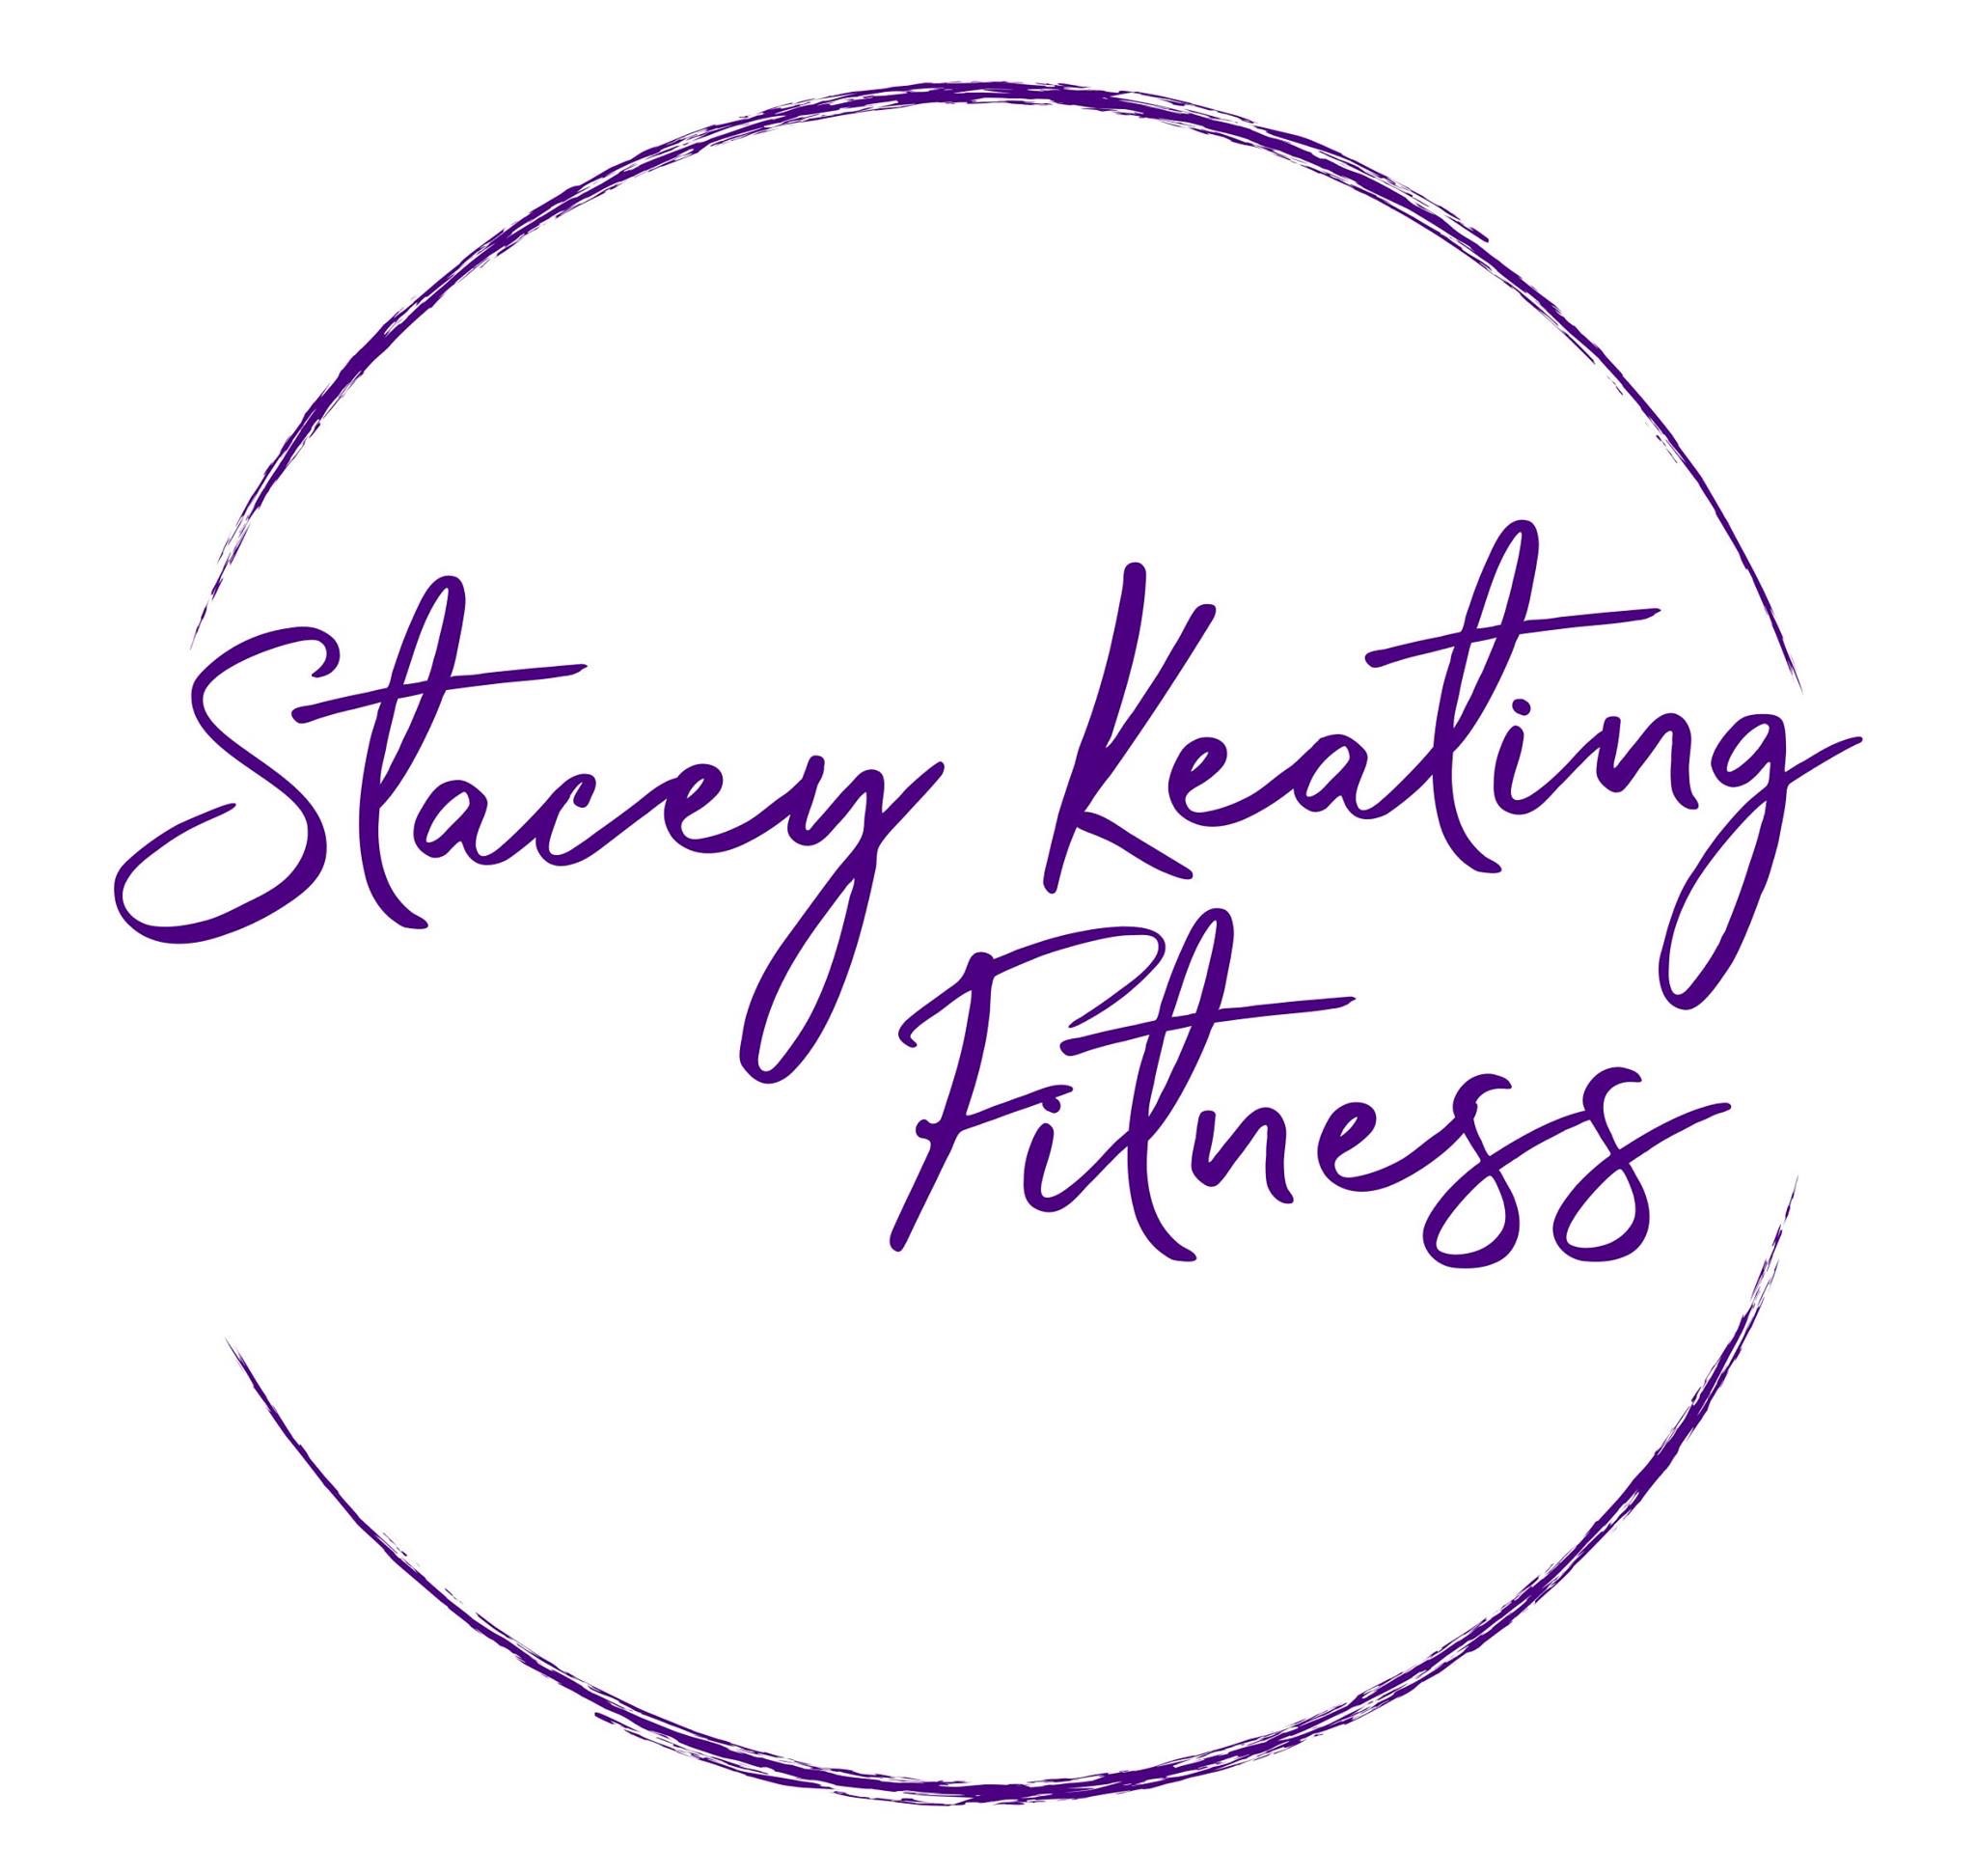 Stacey Keating Fitness